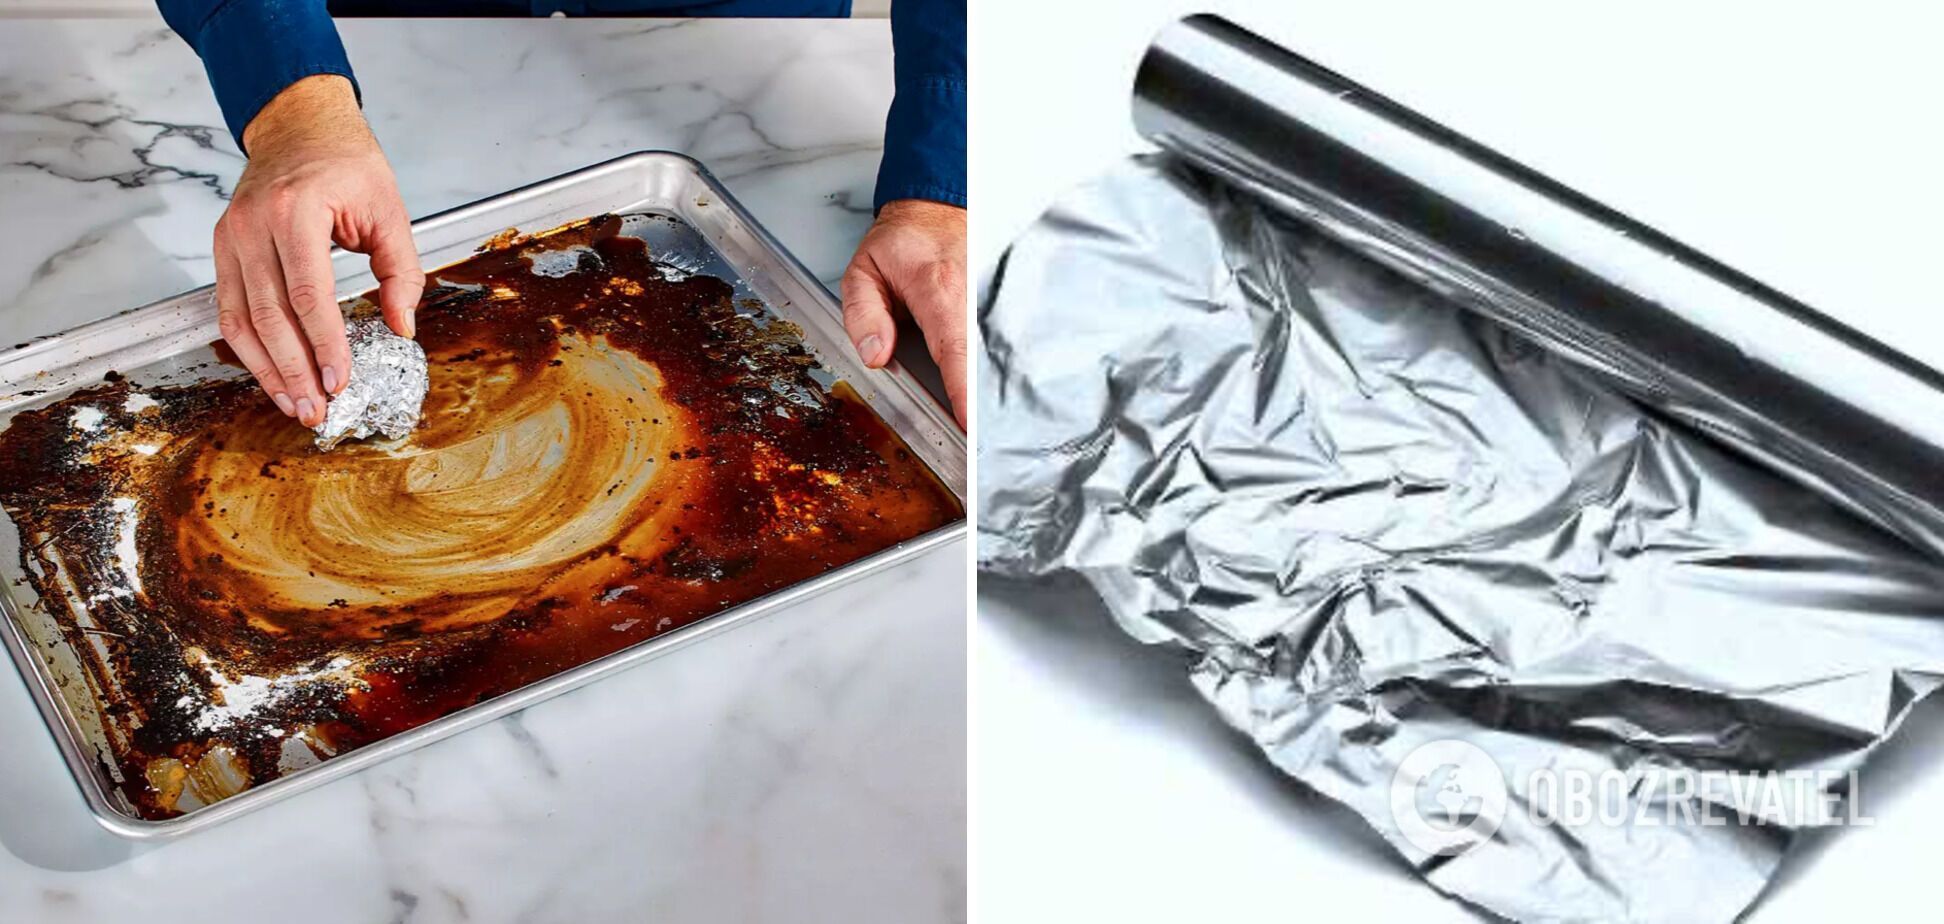 How to clean a baking tray